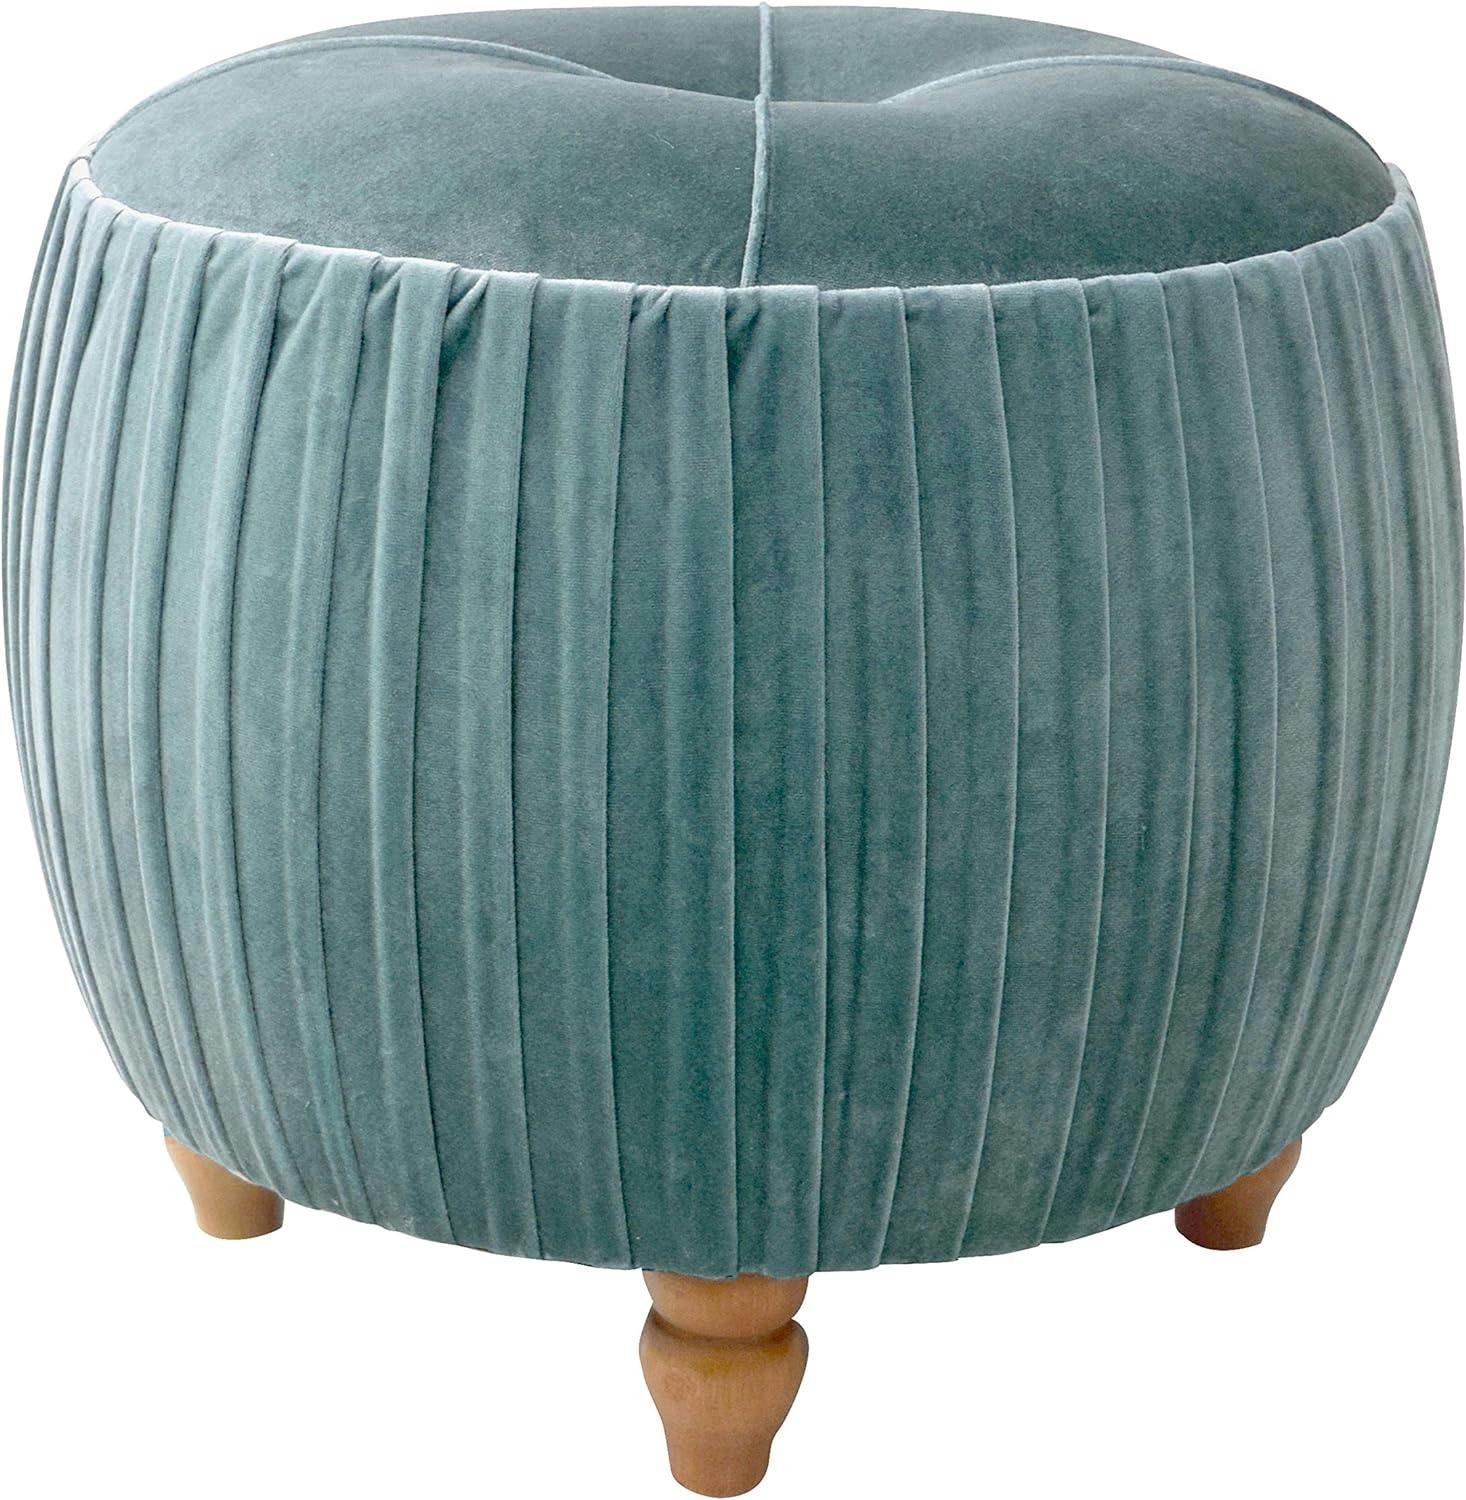 Helena Emerald Green Velvet Tufted Round Ottoman with Natural Wood Legs